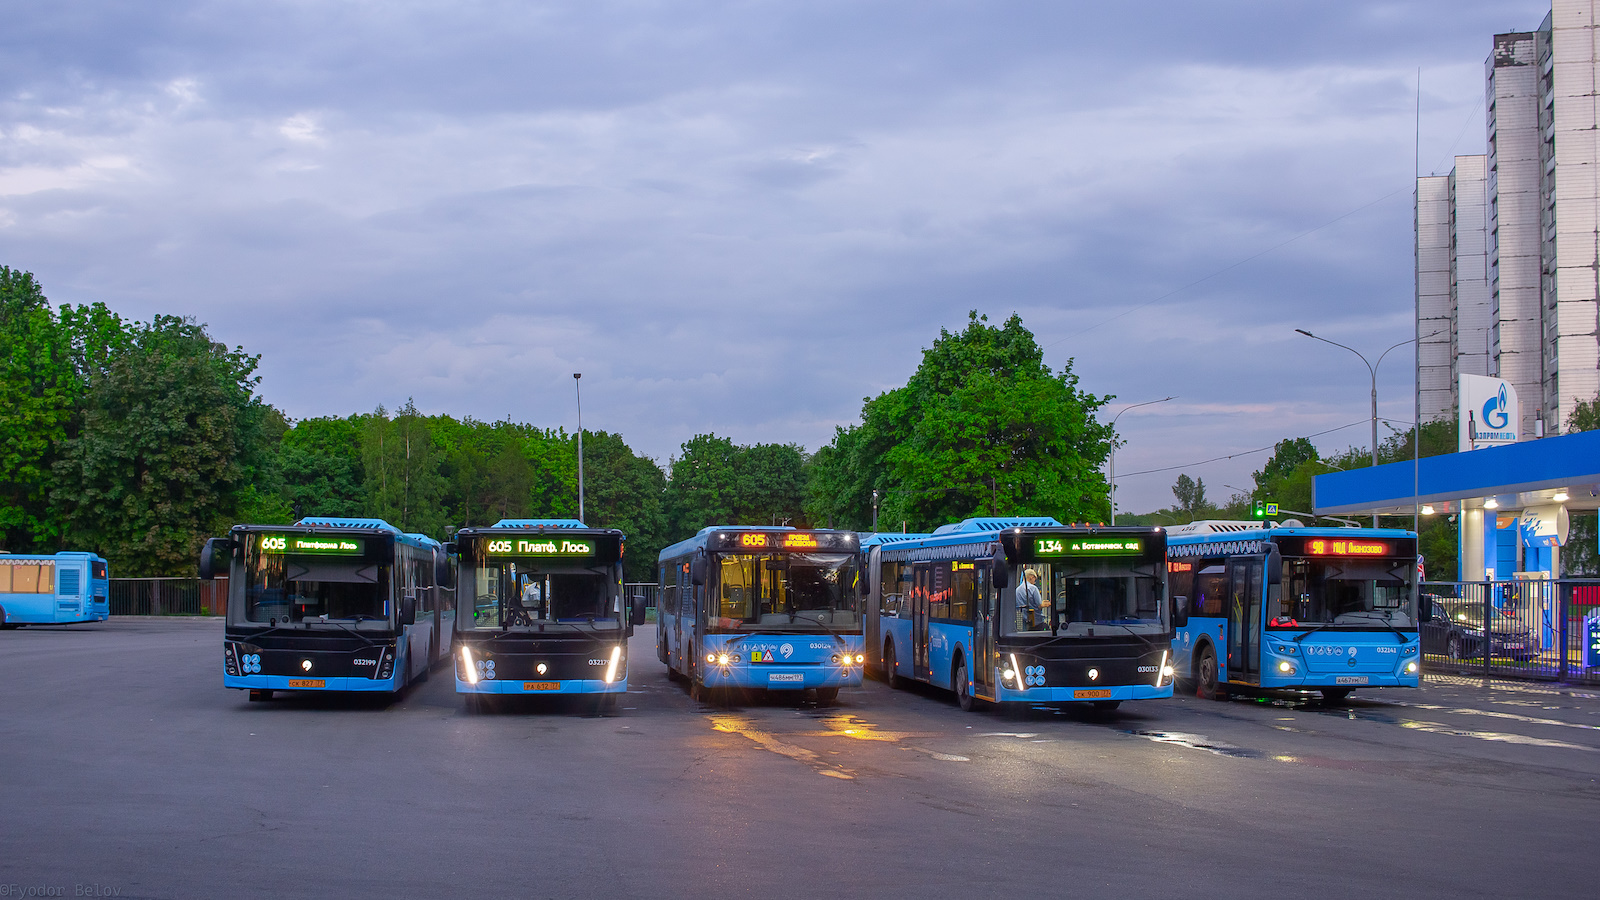 Μόσχα, LiAZ-6213.65 # 032179; Μόσχα, LiAZ-5292.22-01 # 030124; Μόσχα — Bus stations